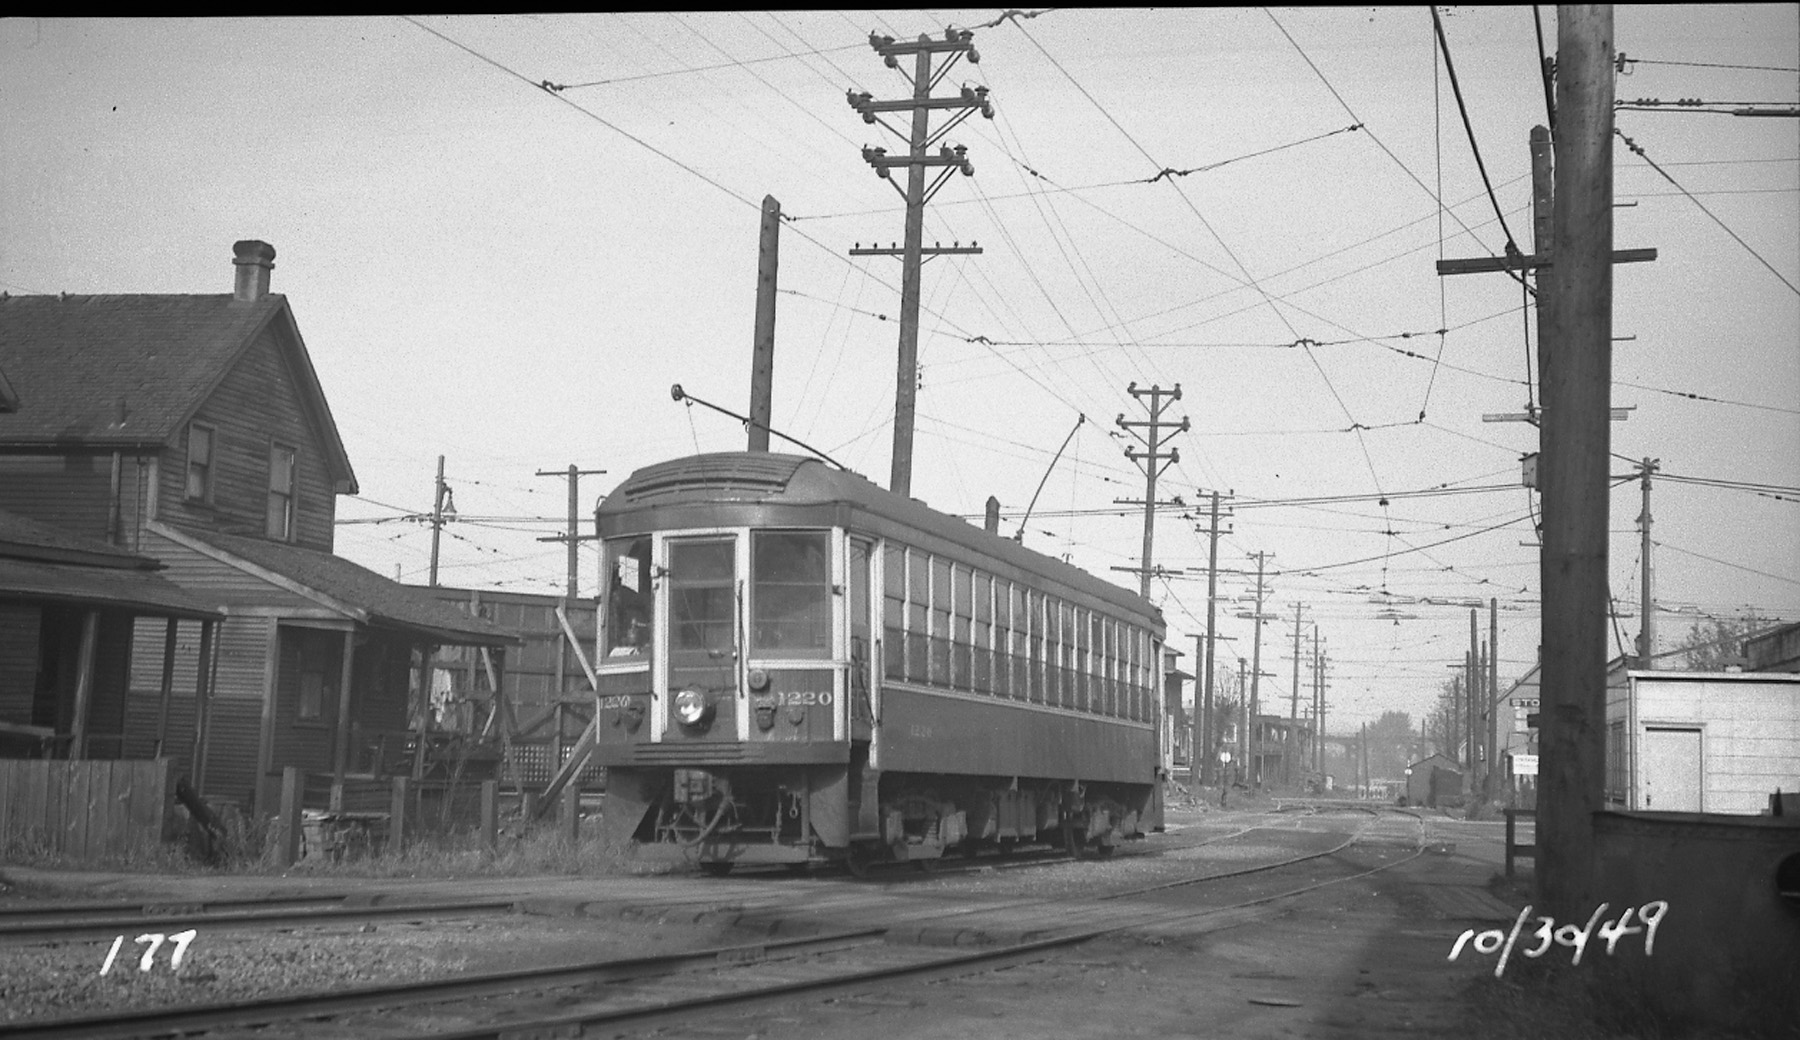 Black and white photo of historic tram number 1220 on rails